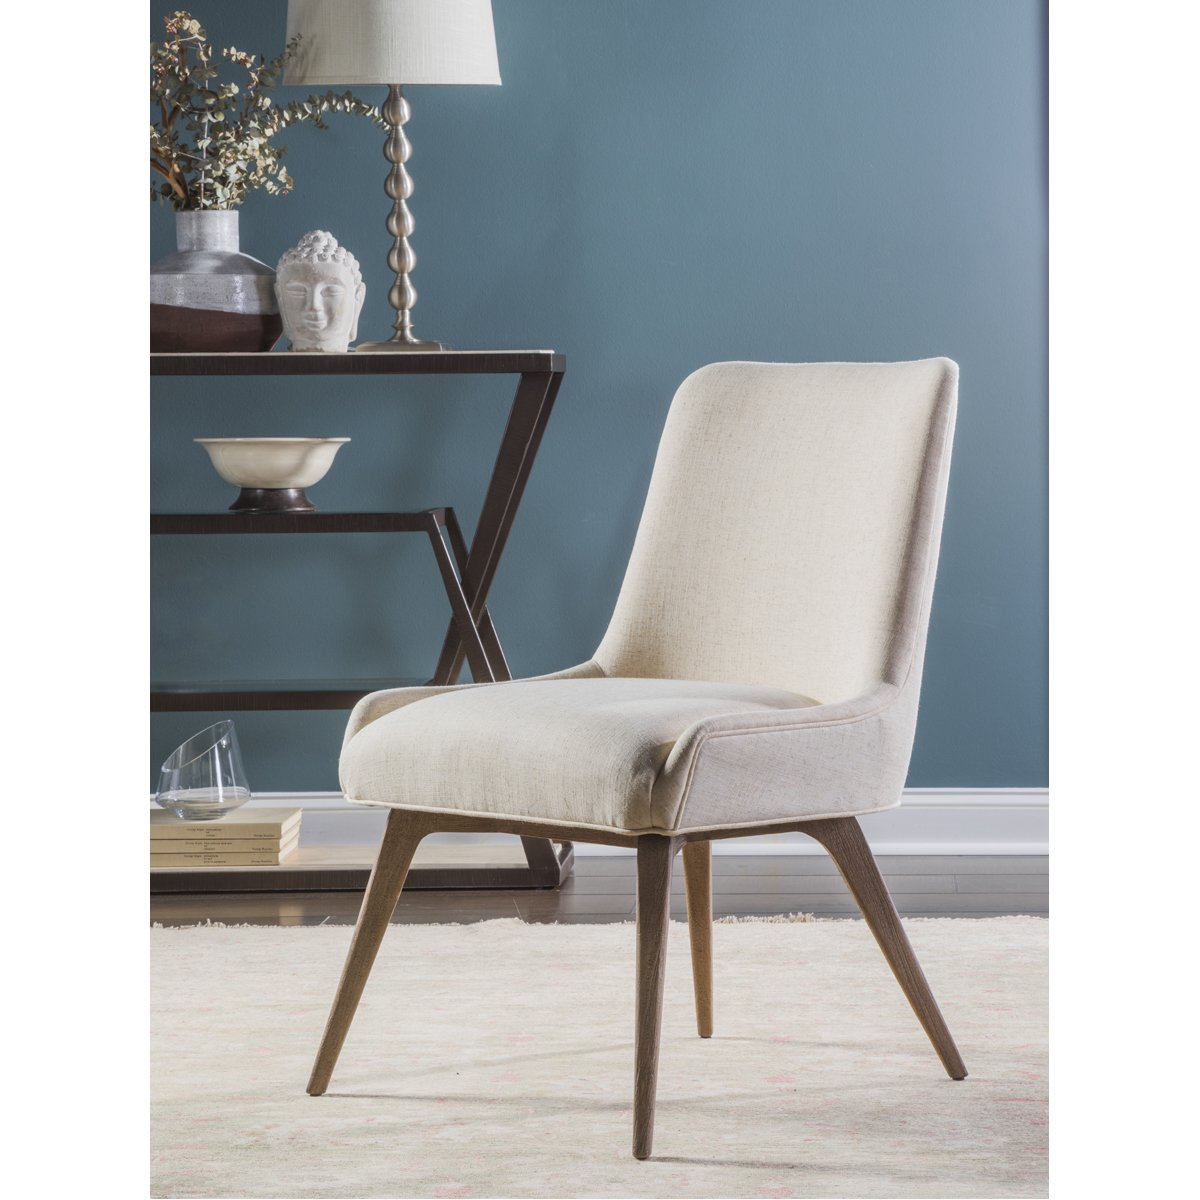 Artistica Home Mila Upholstered Side Chair 2264-880-01